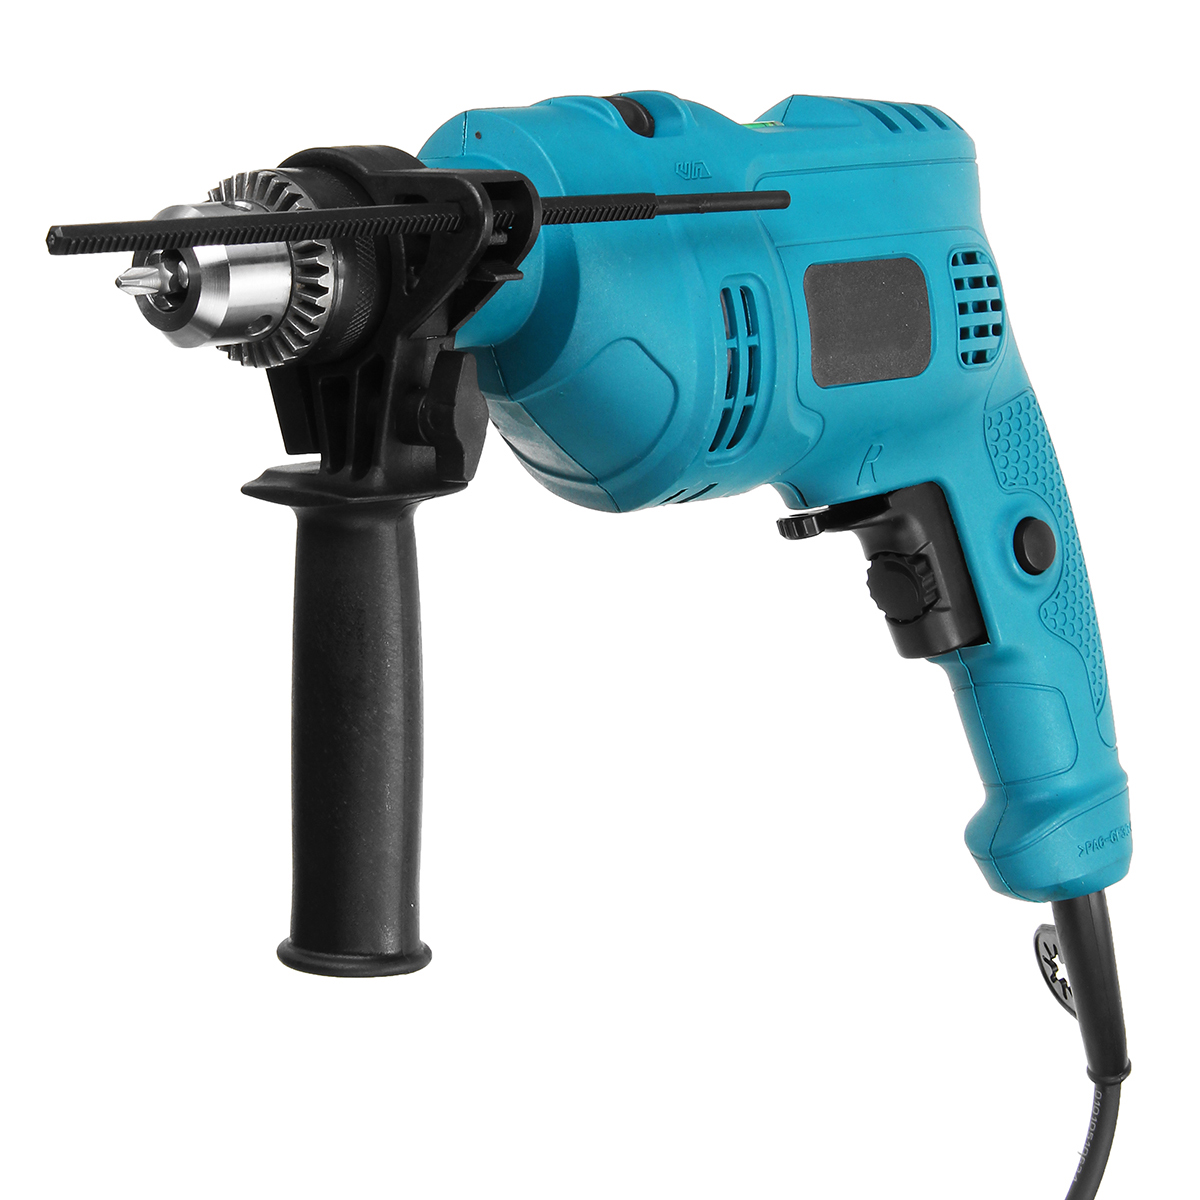 220V-3000RPM-650W-Electric-Impact-Cordless-Wrench-Drill-Hammer-Screwdriver-SET-1555908-8